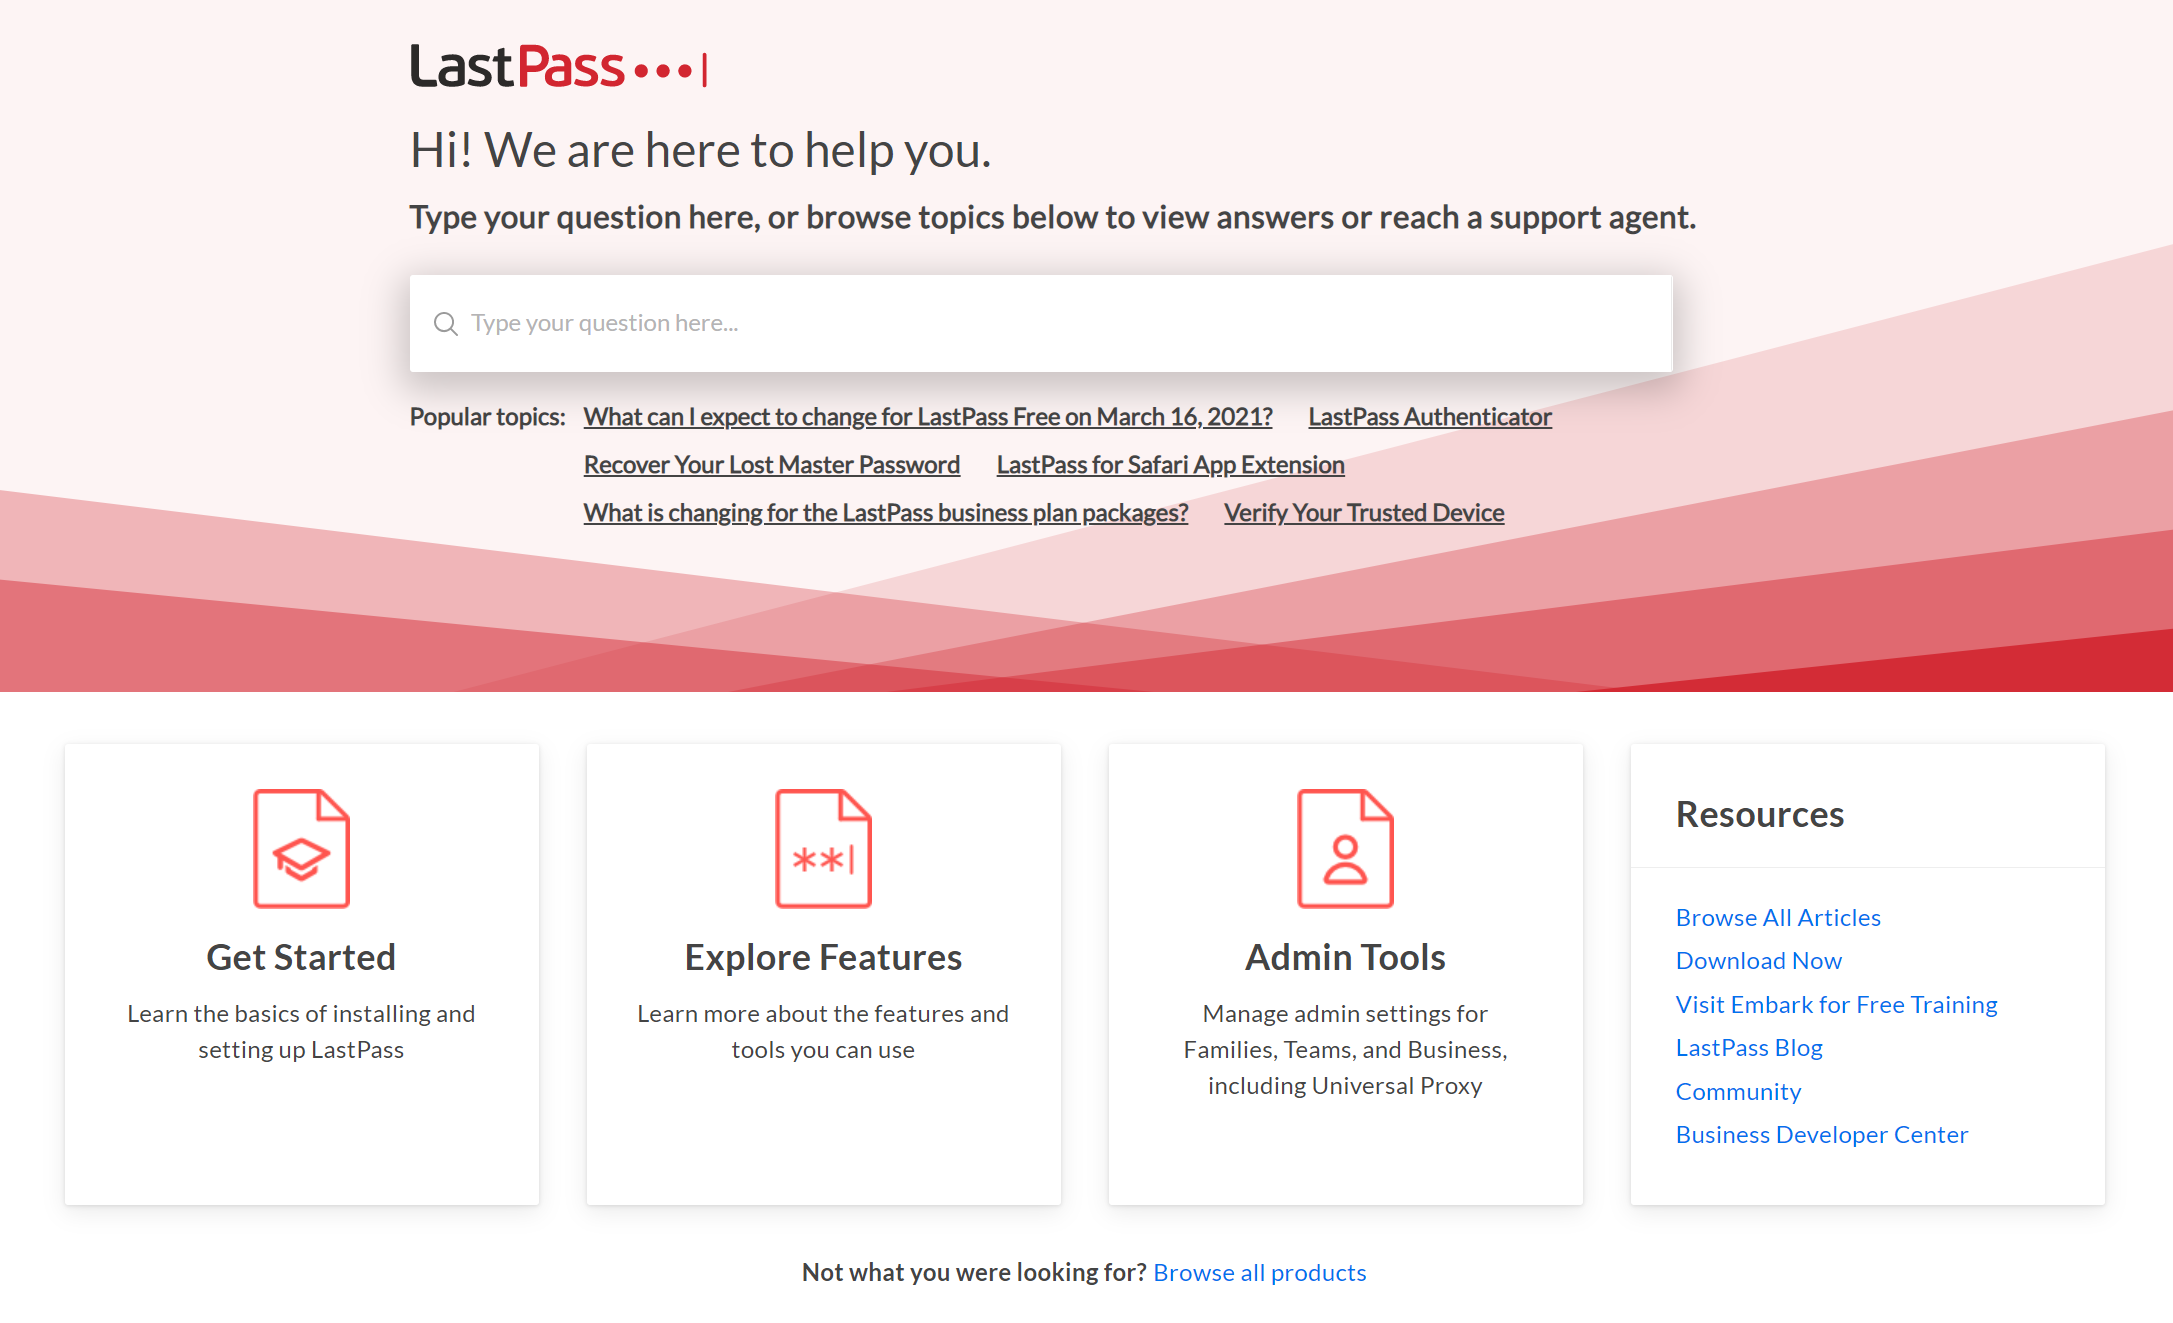 does lastpass support support u2f